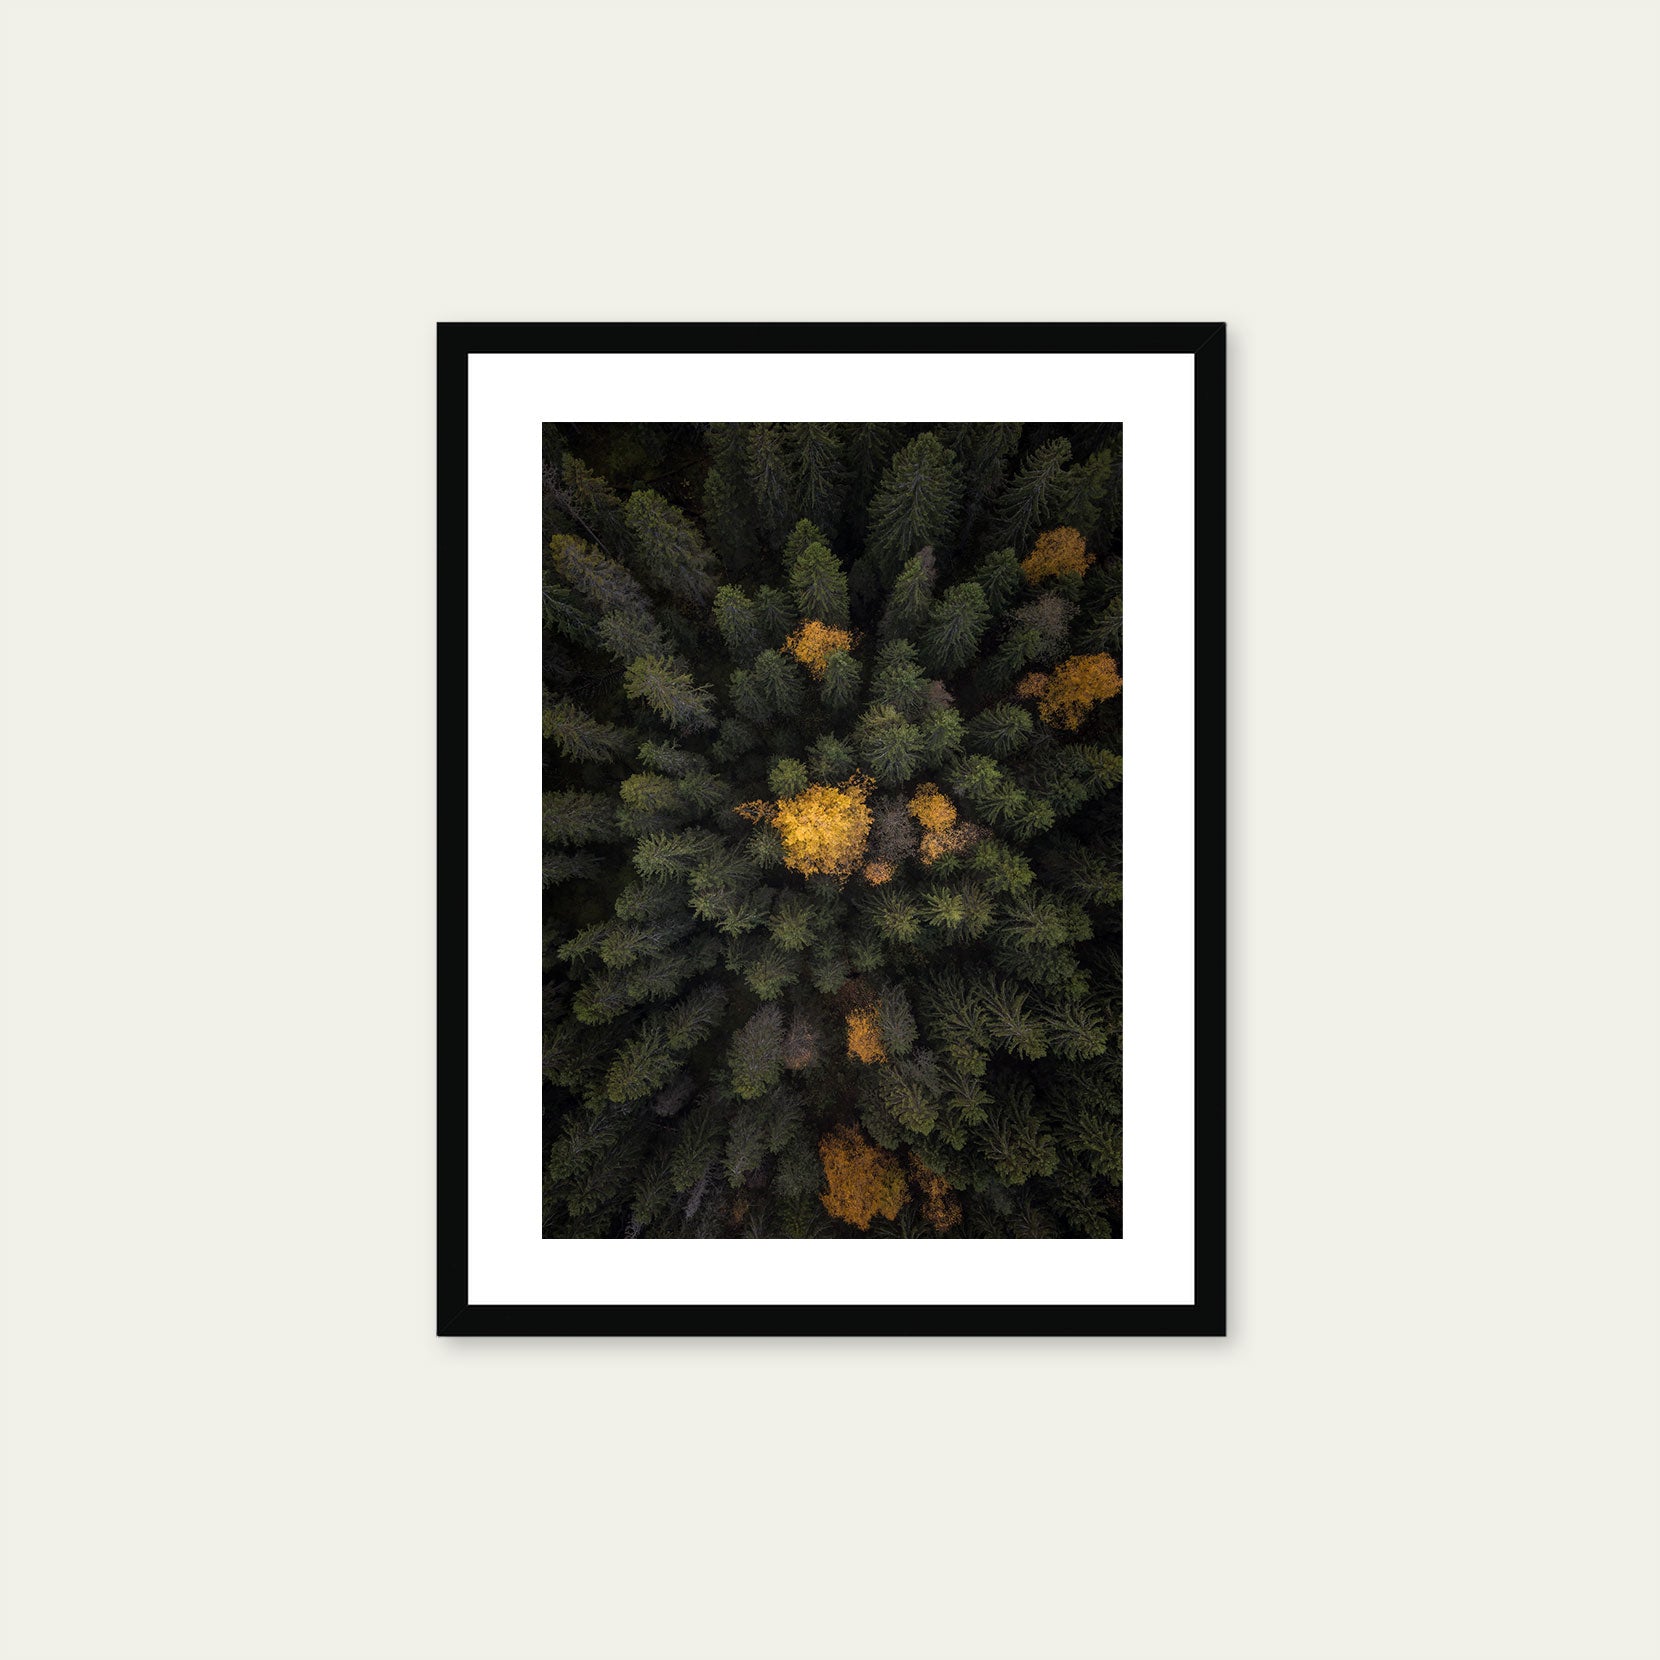 A black framed print of a forest from above